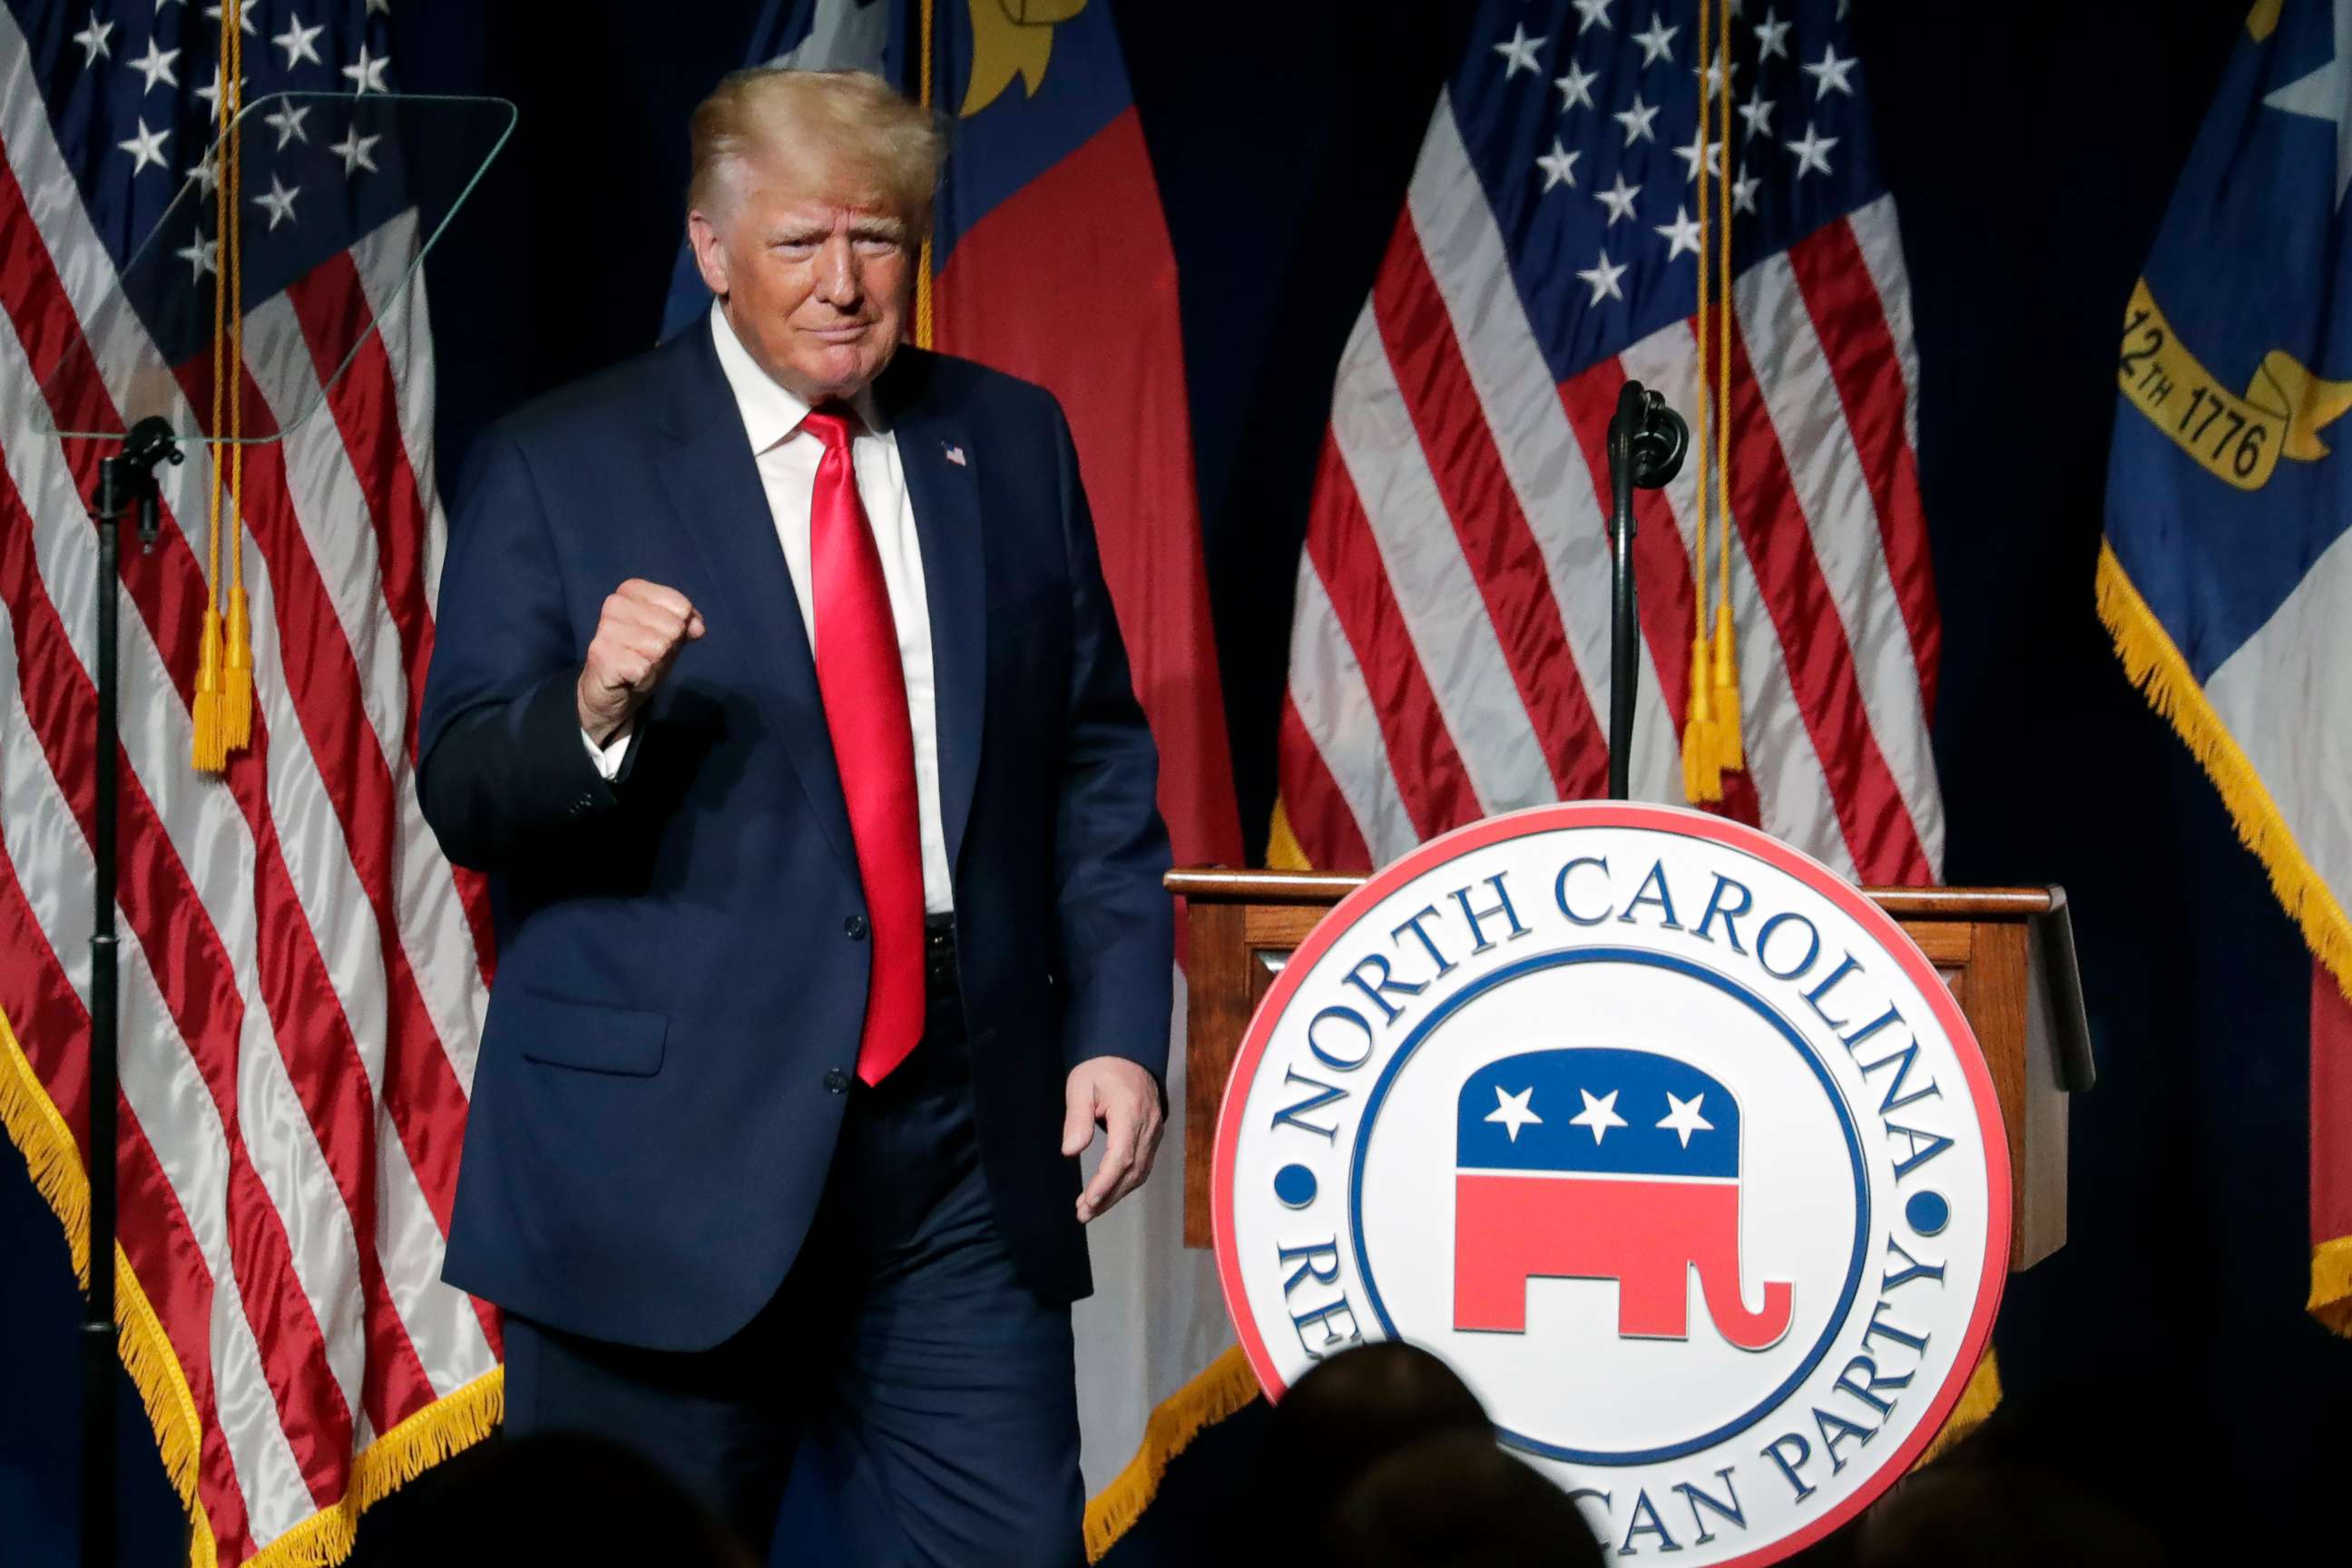 Donald Trump returns to stage with speech at North Carolina GOP